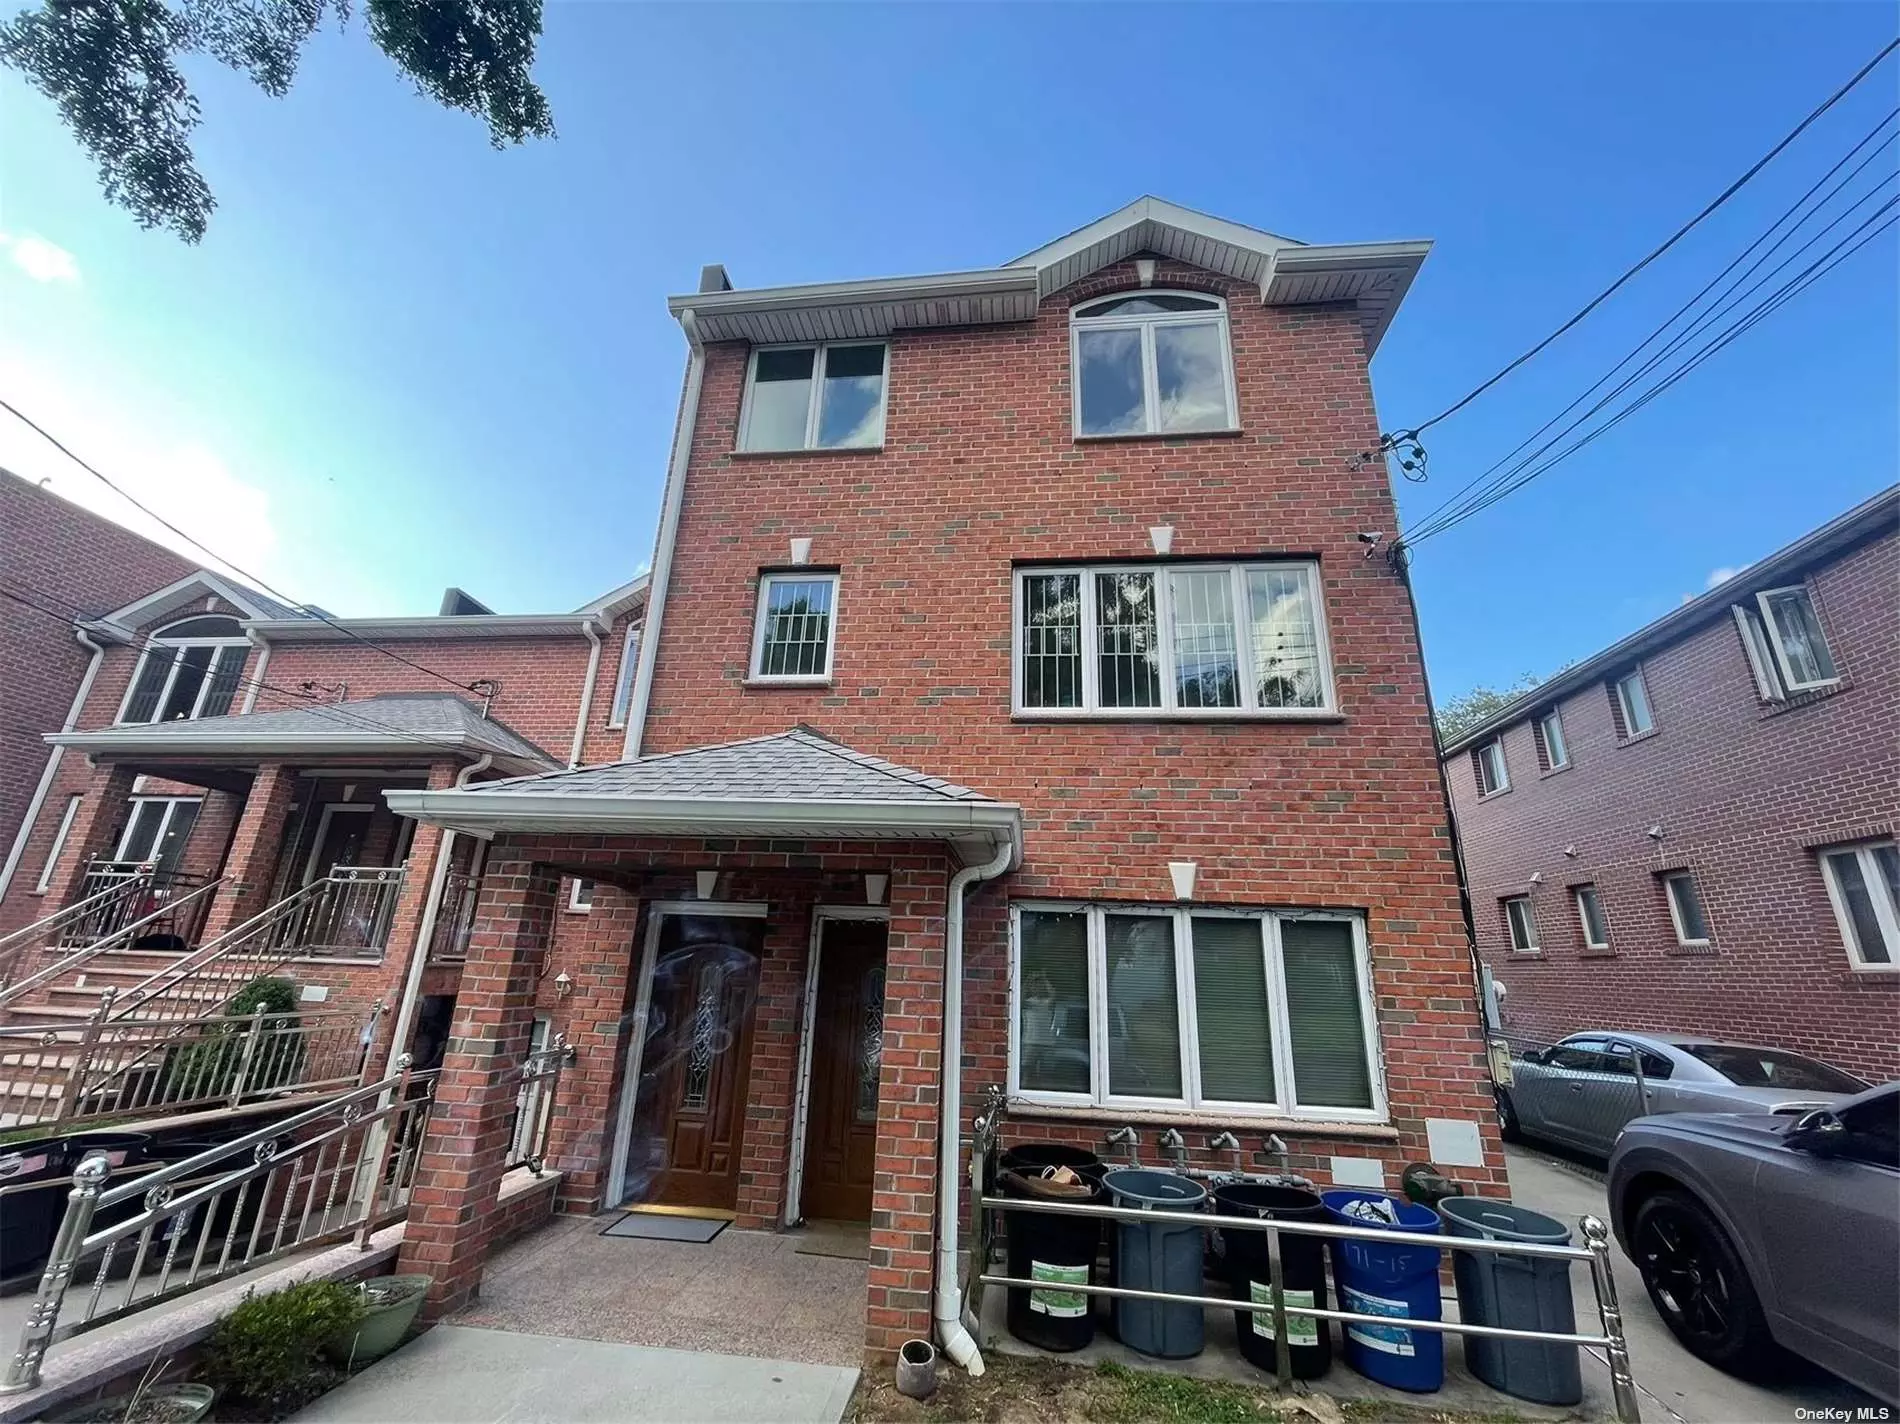 2BED ROOM APARTMENT ON THE 3RD FLOOR. CLOSE TO SCHOOL AND LIE495 TENANTS PAY ELECTRIC AND GAS. ONLY WATER IS INCLUDED WITH RENT. THE WASHER AND DRYER ARE IN THE BASEMENT WALKING DISTANCE TO SCHOOL PS173 AND 216 RYAN